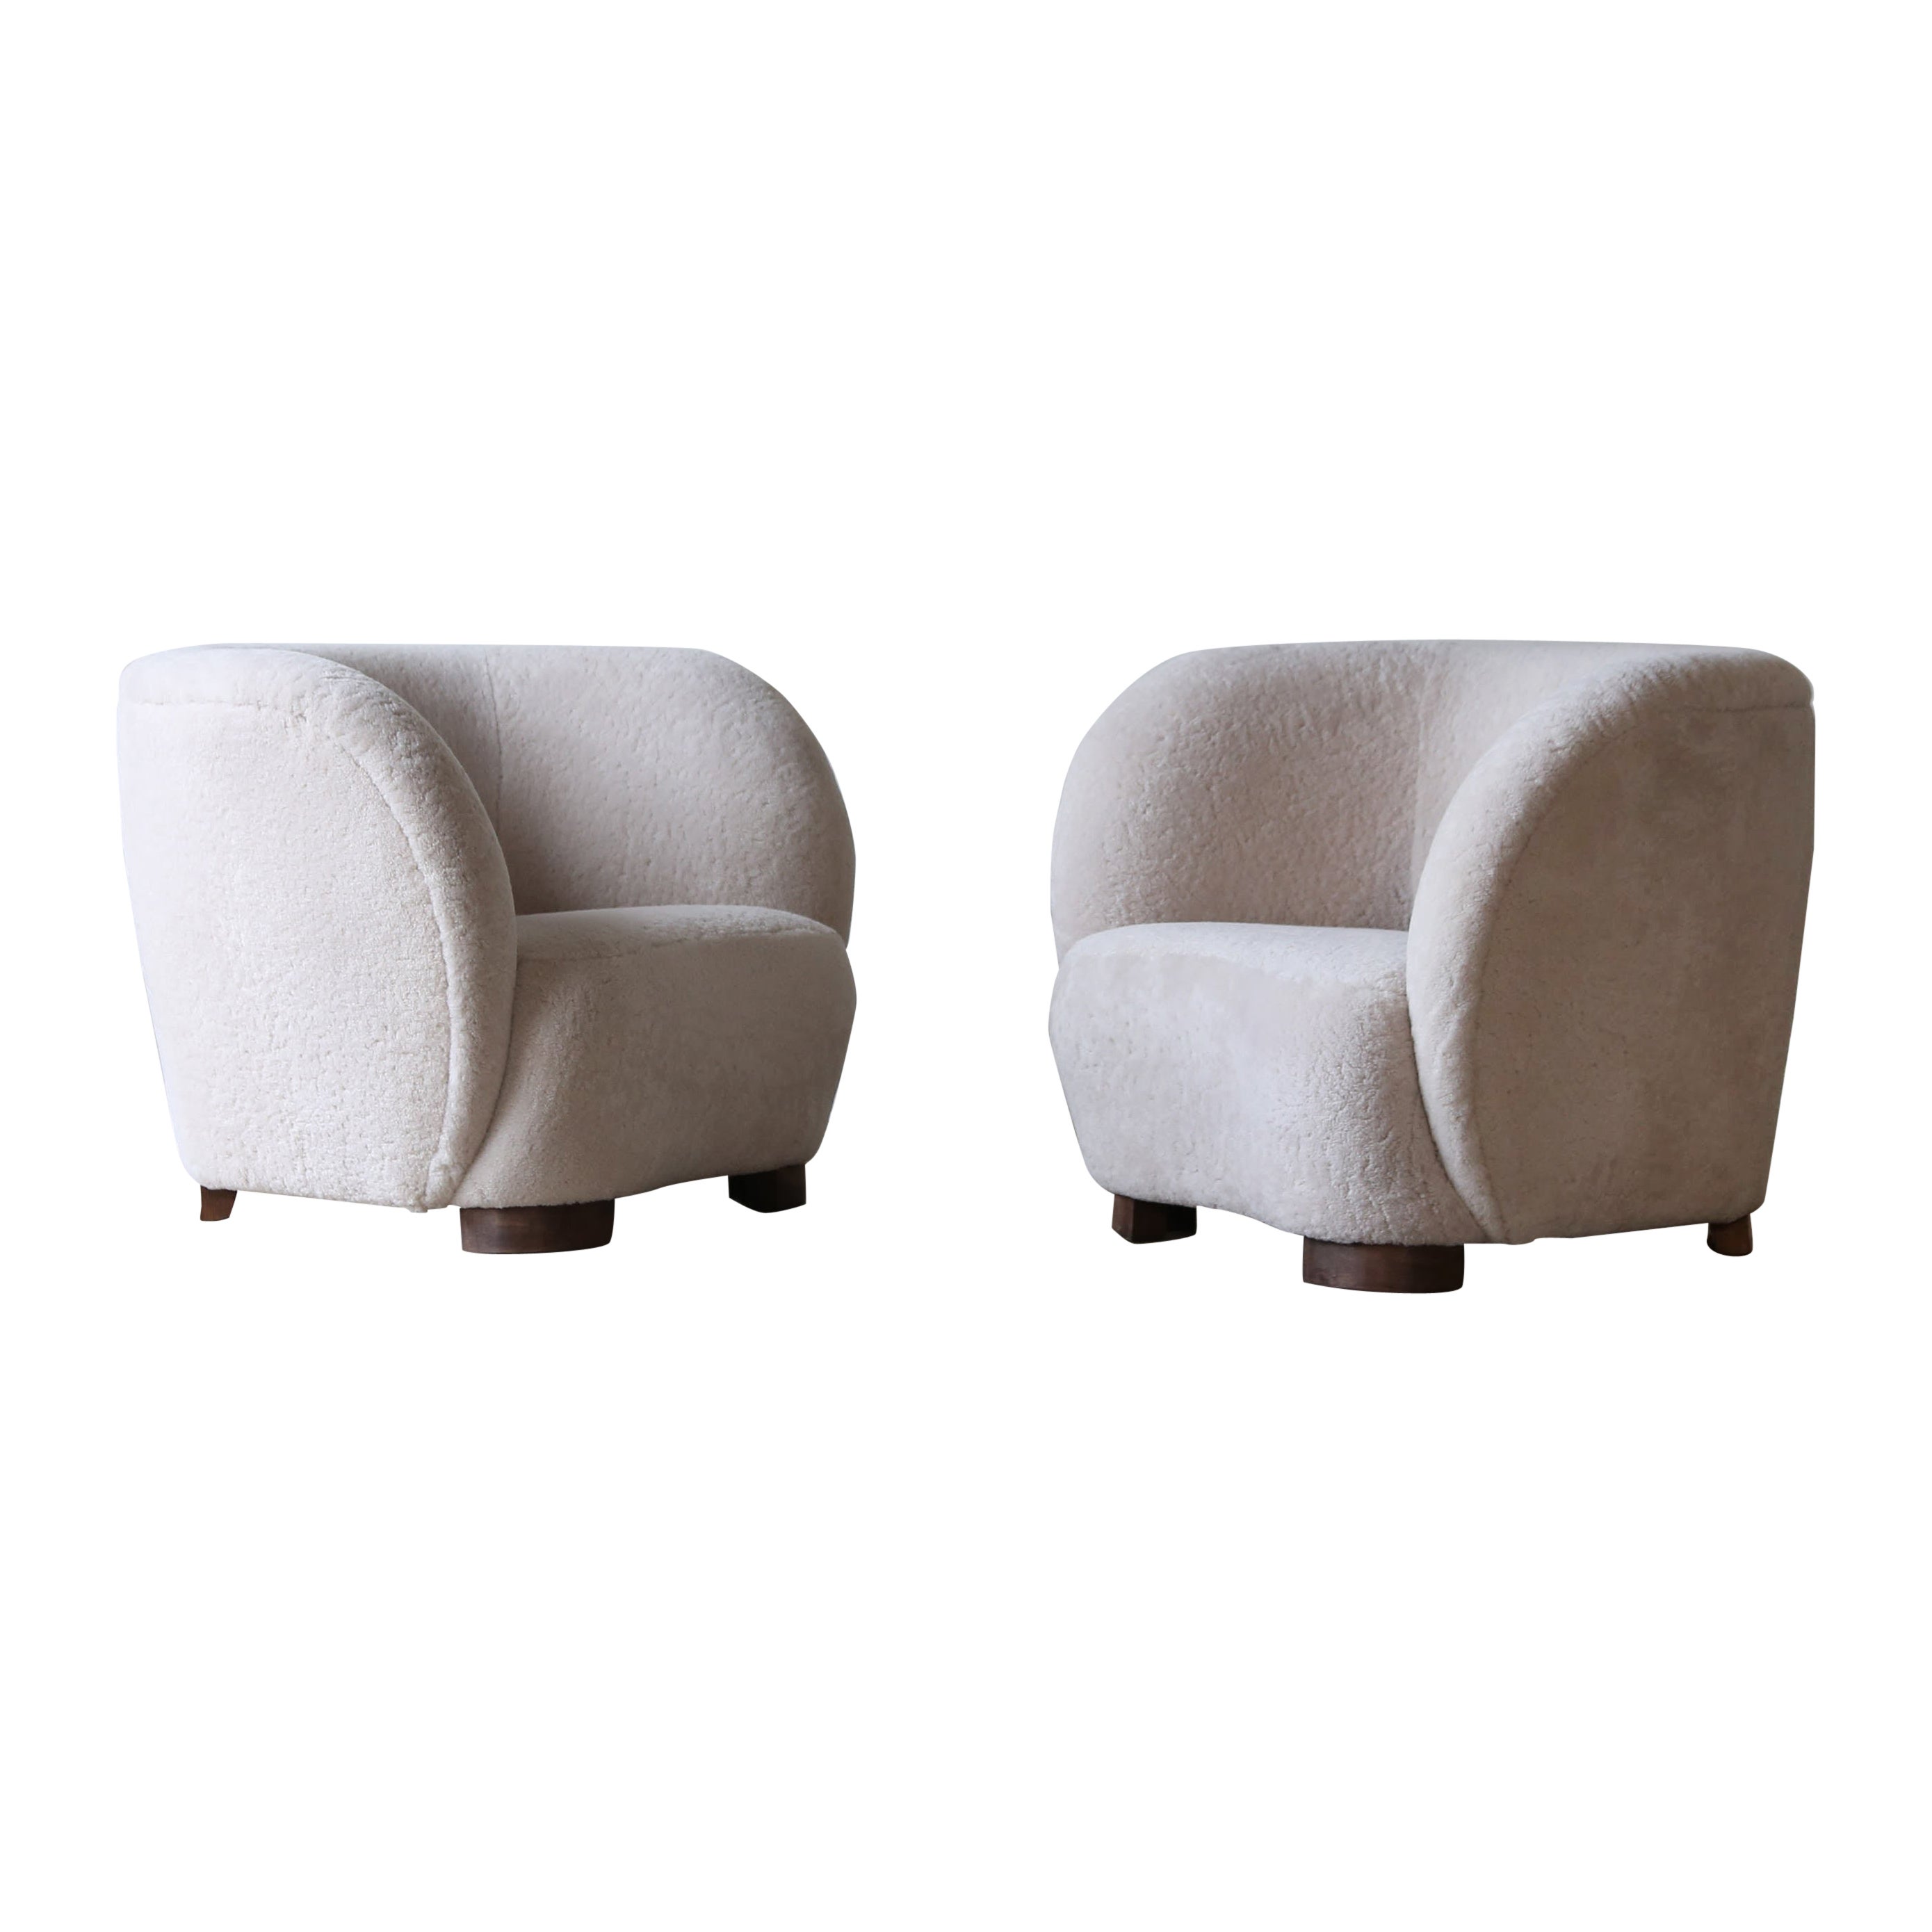 A Pair of Armchairs in Natural Sheepskin Upholstery